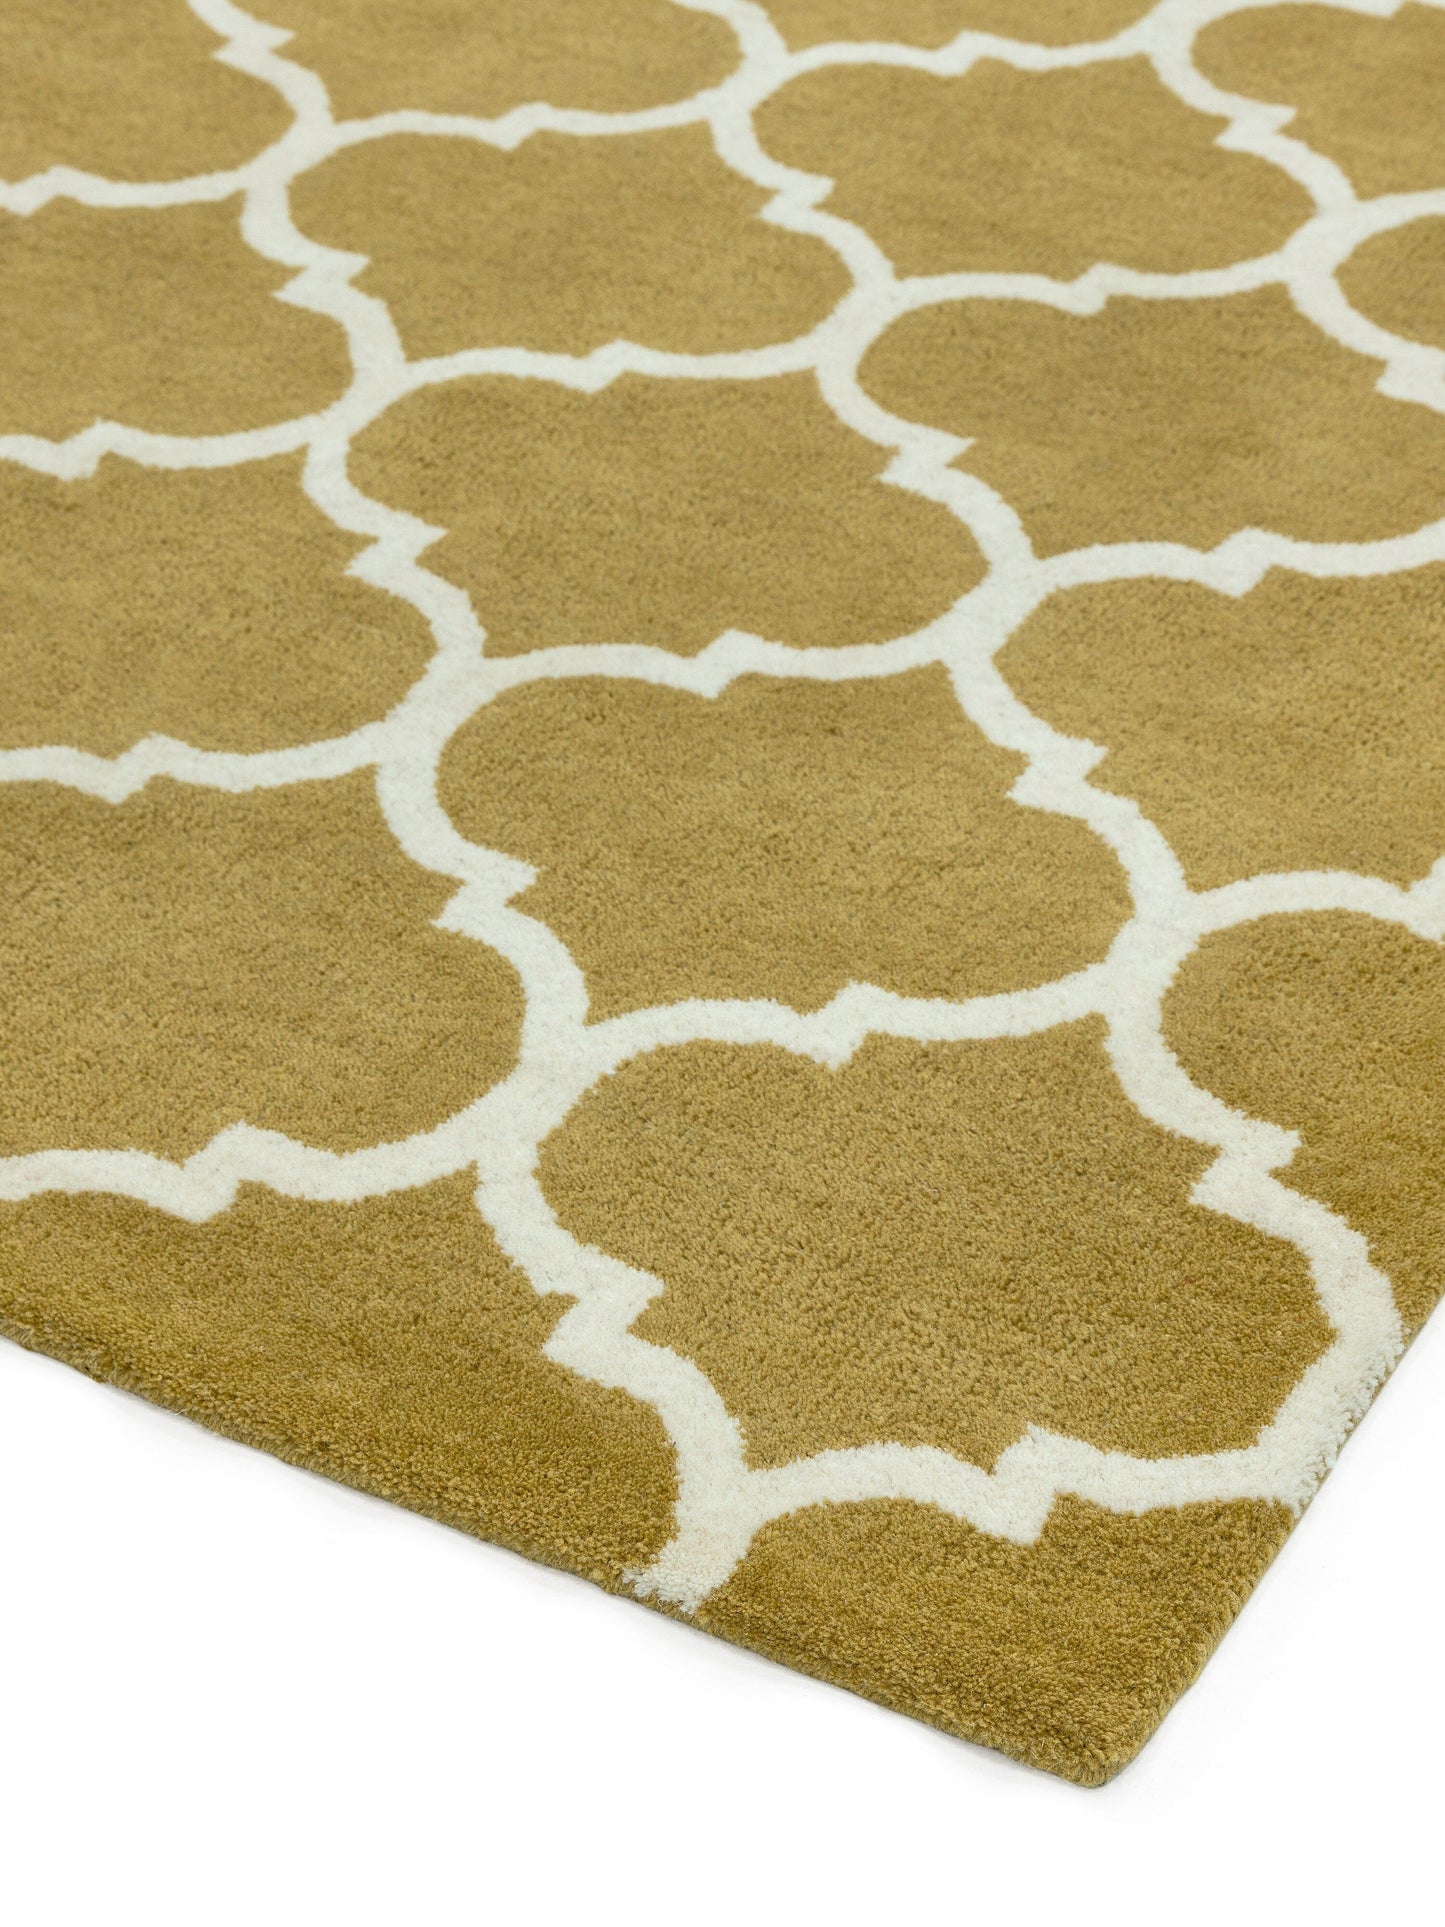 Asiatic Carpets Albany Handtufted Rug Ogee Ochre - 120 x 170cm